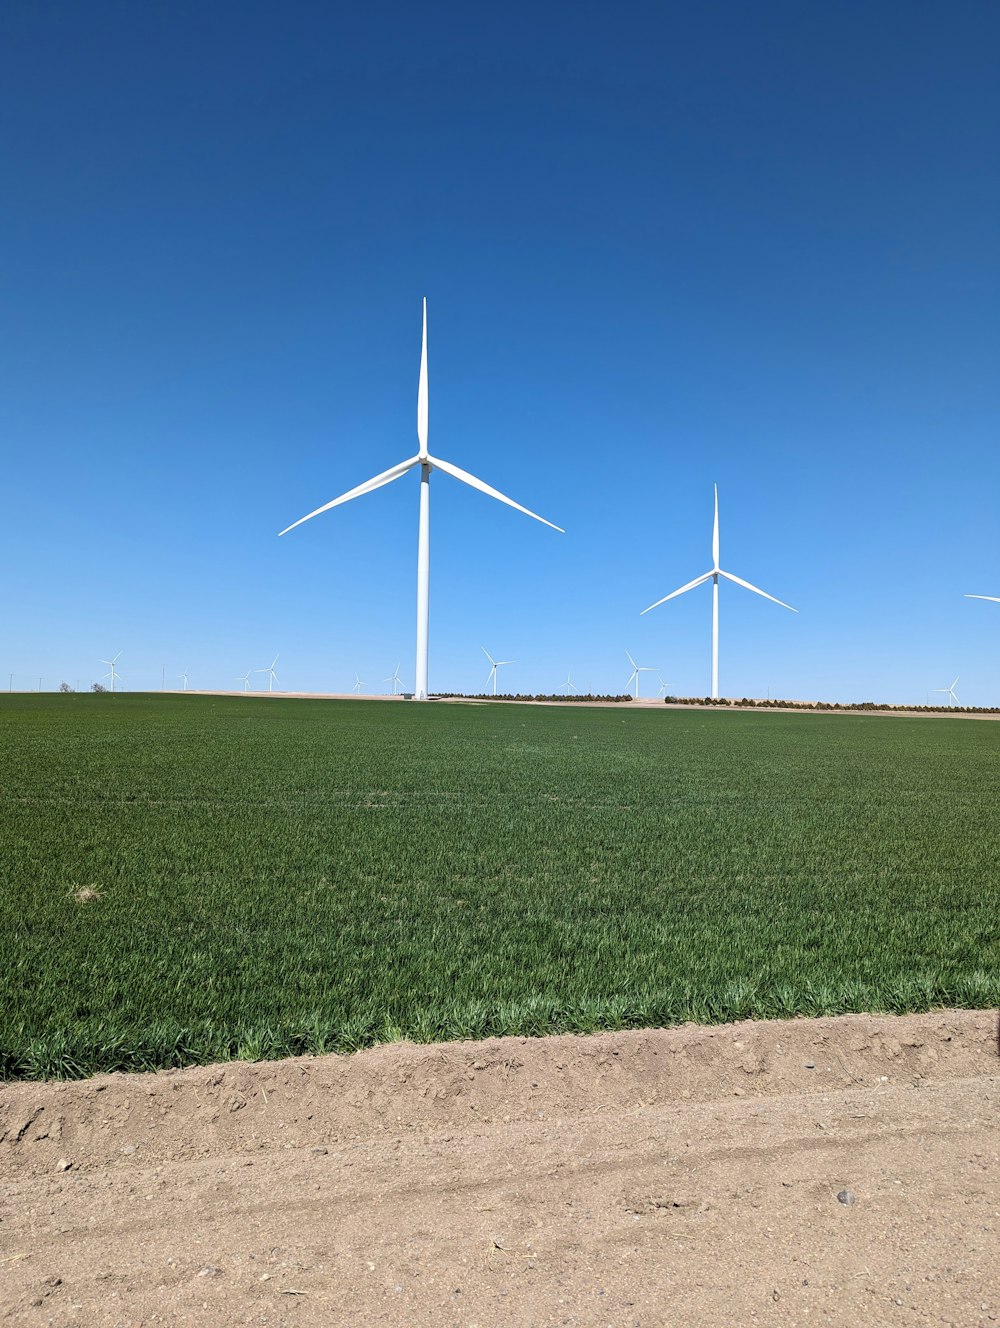 a field of green grass with three wind turbines in the background